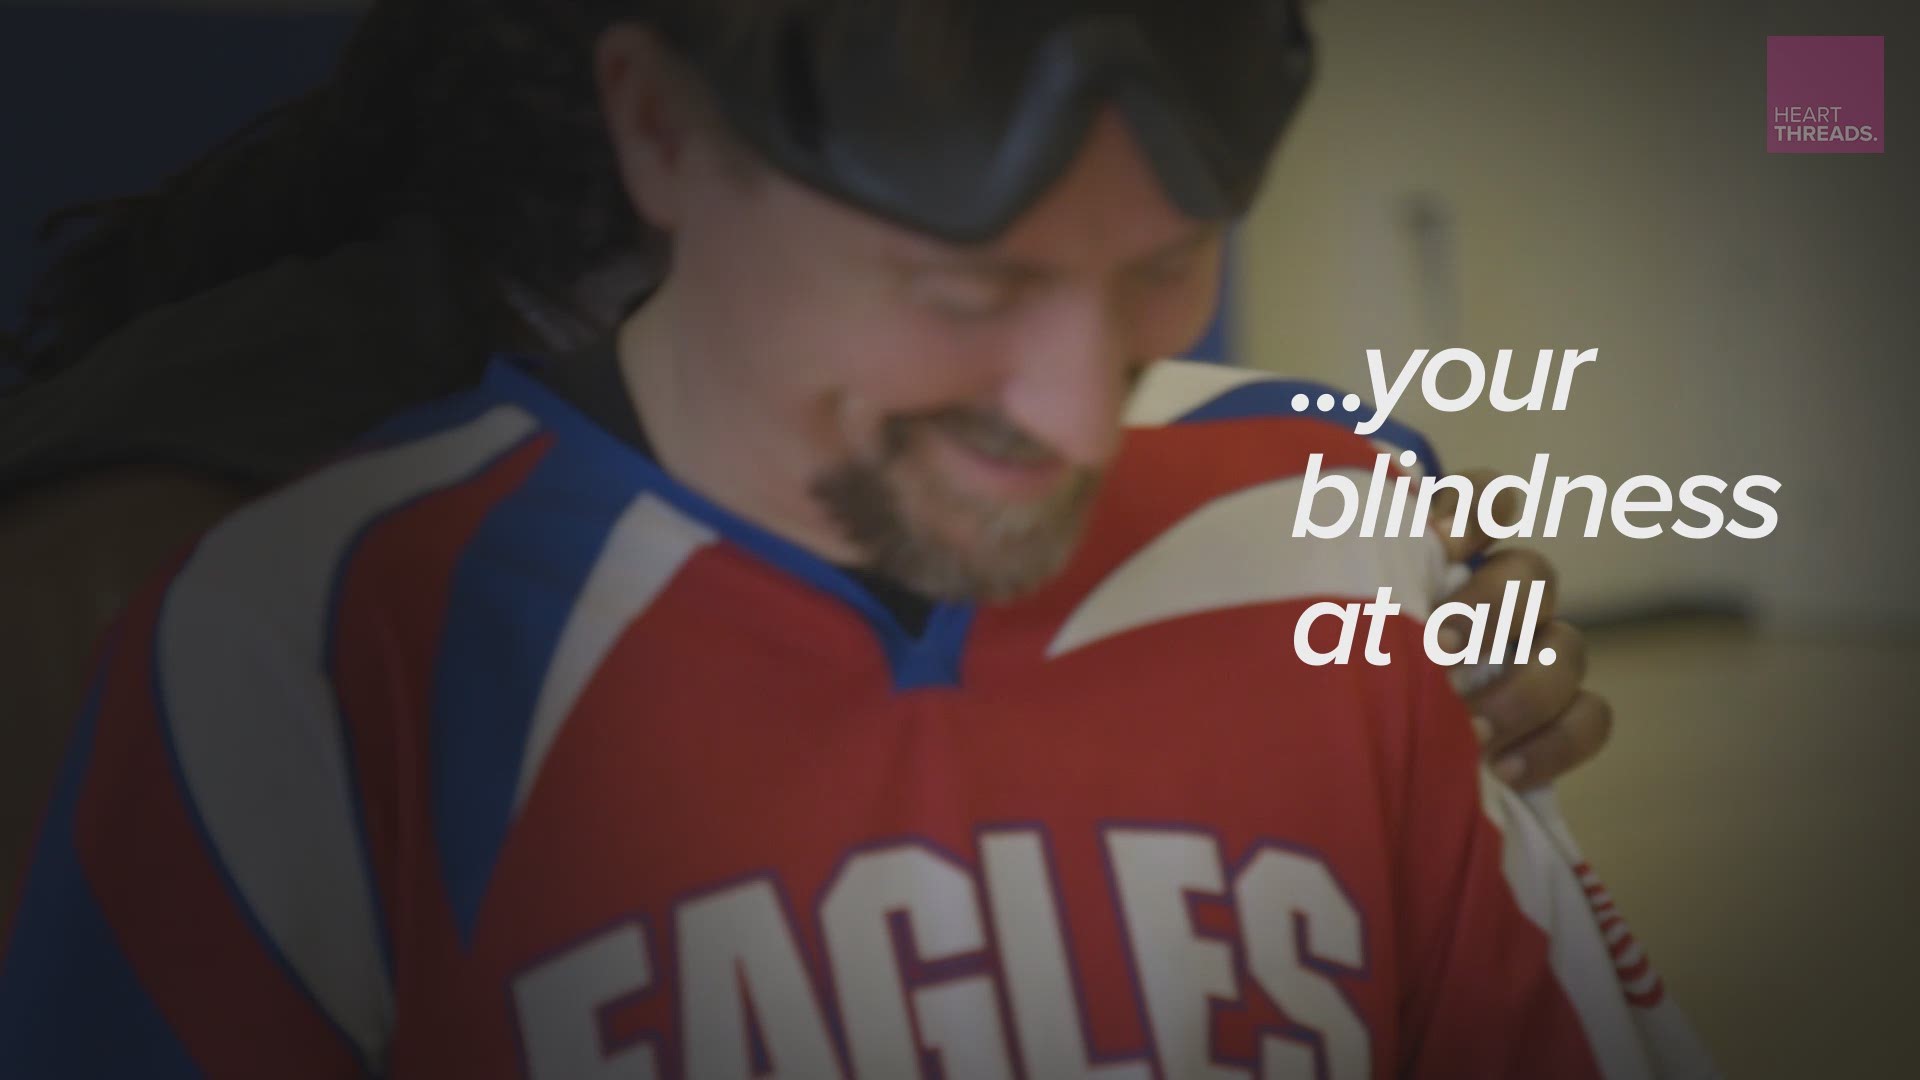 Kurt always knew he would eventually go blind from a progressive vision condition. As he slowly lost his sight, he also lost hope. Then, a sport called goalball helped get his life back into focus.